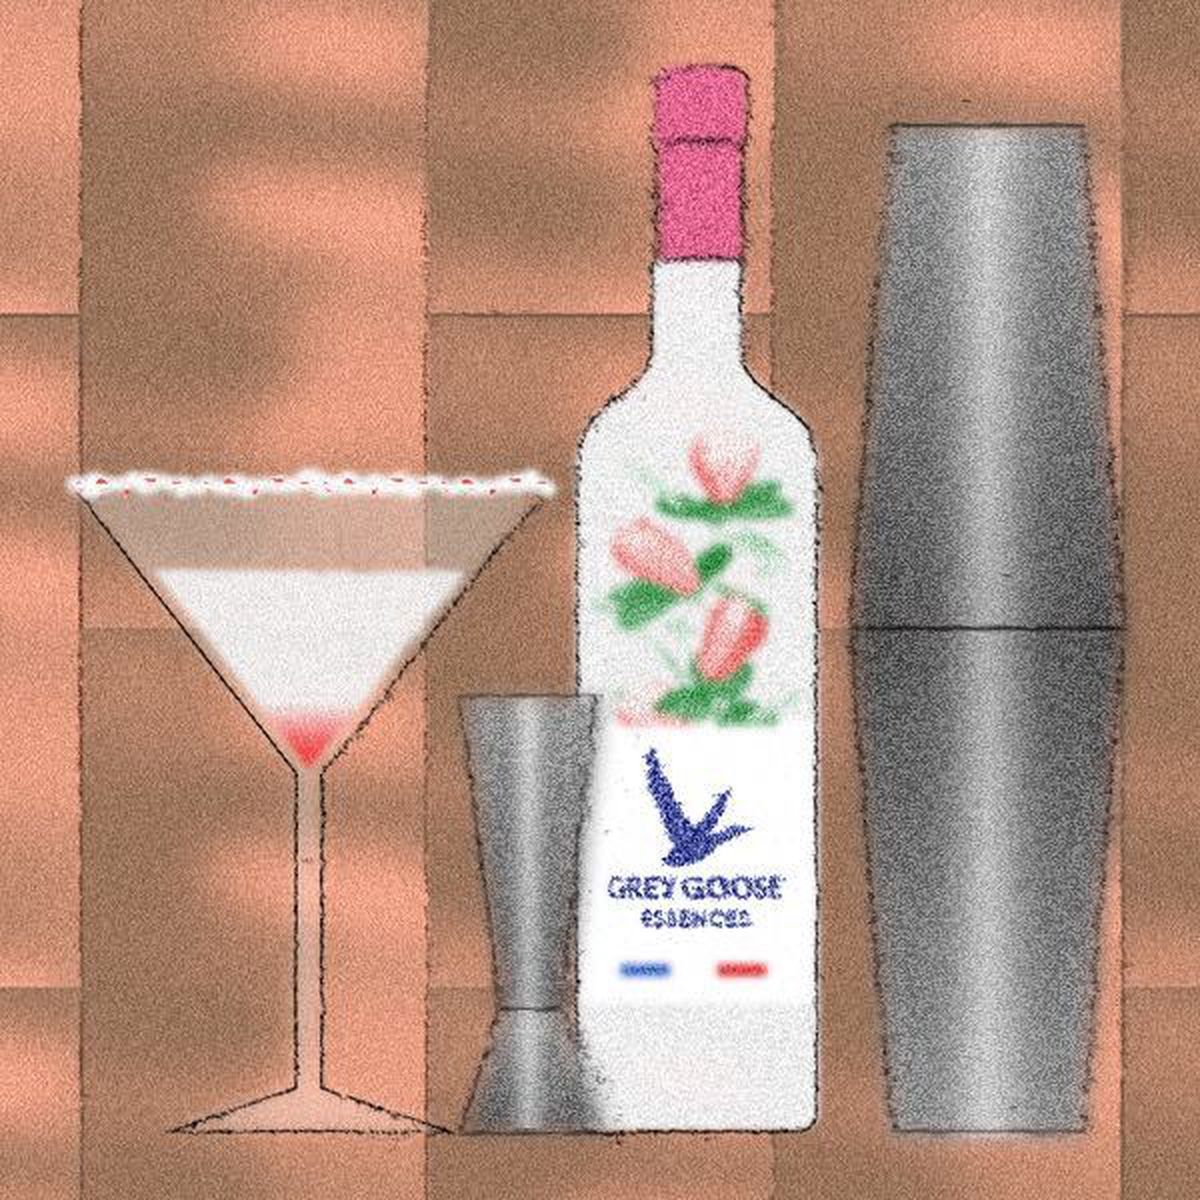 An illustration of a cocktail in a martini glass next to a shaker and a bottle of Grey Goose Essences Strawberry.